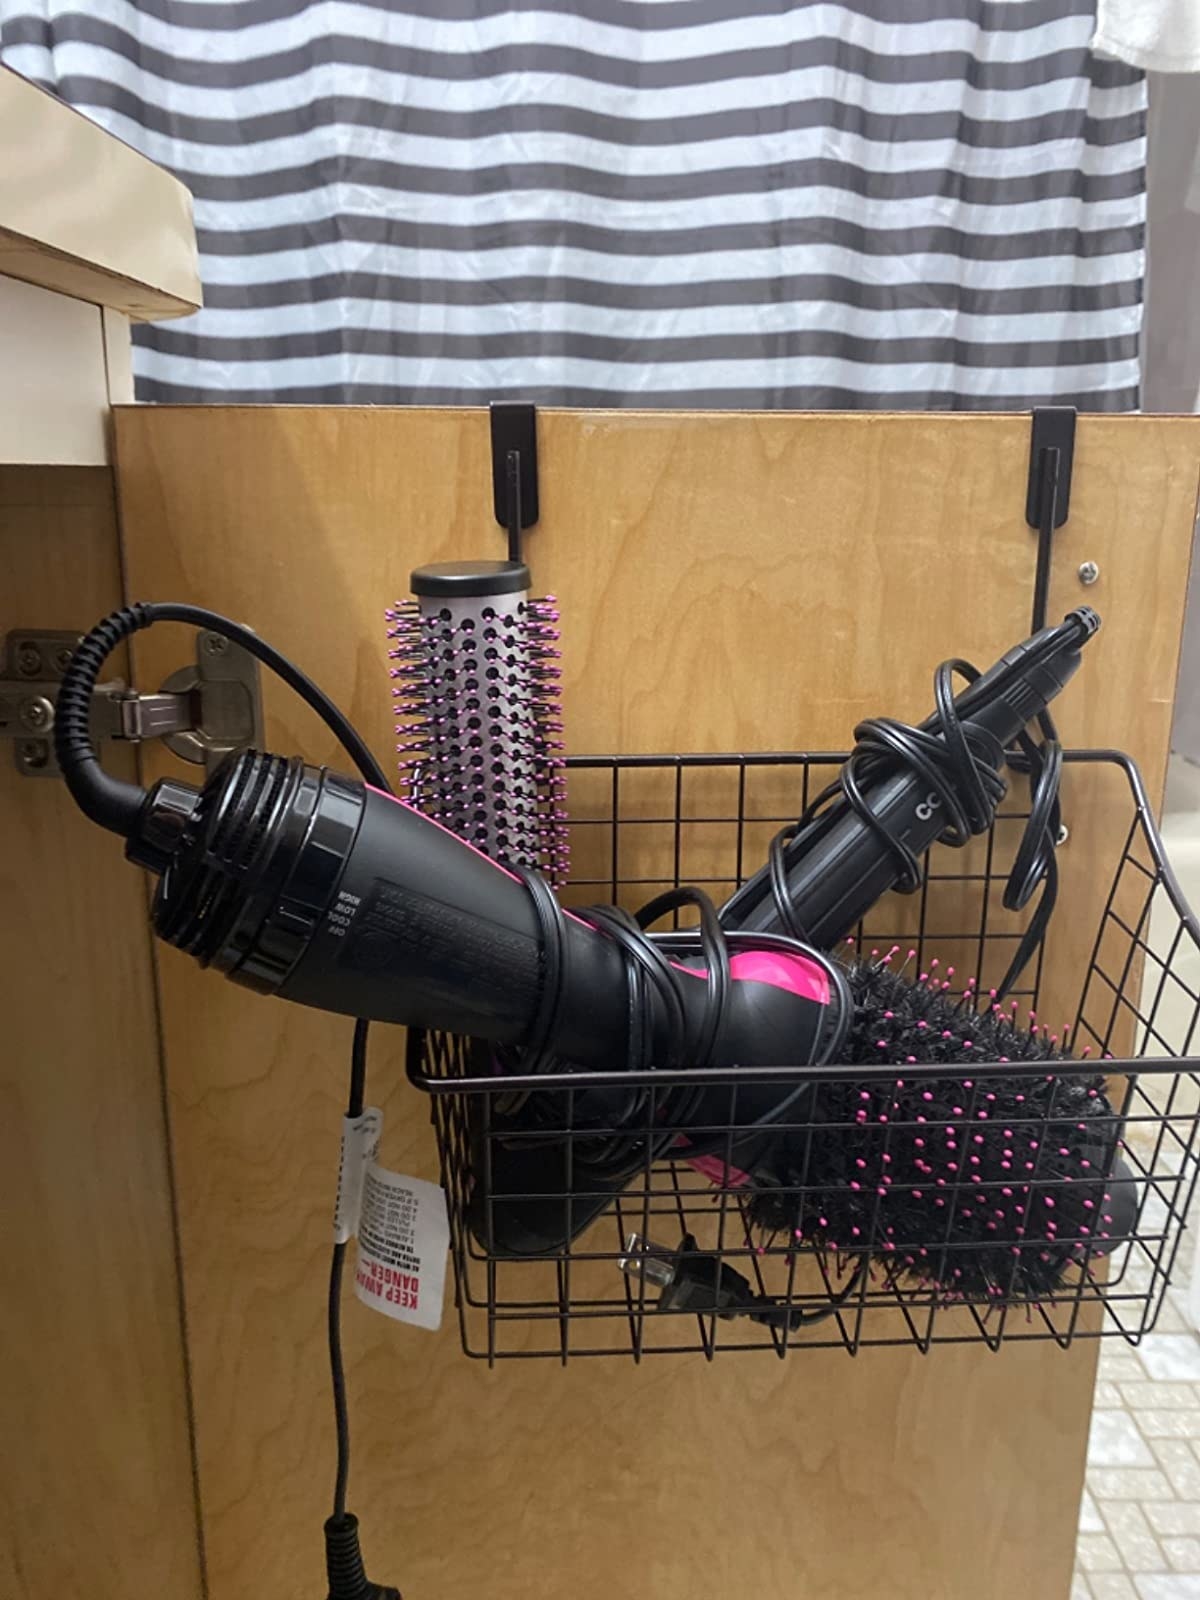 Reviewer image of basket hanging on a cabinet door holding hair styling tools